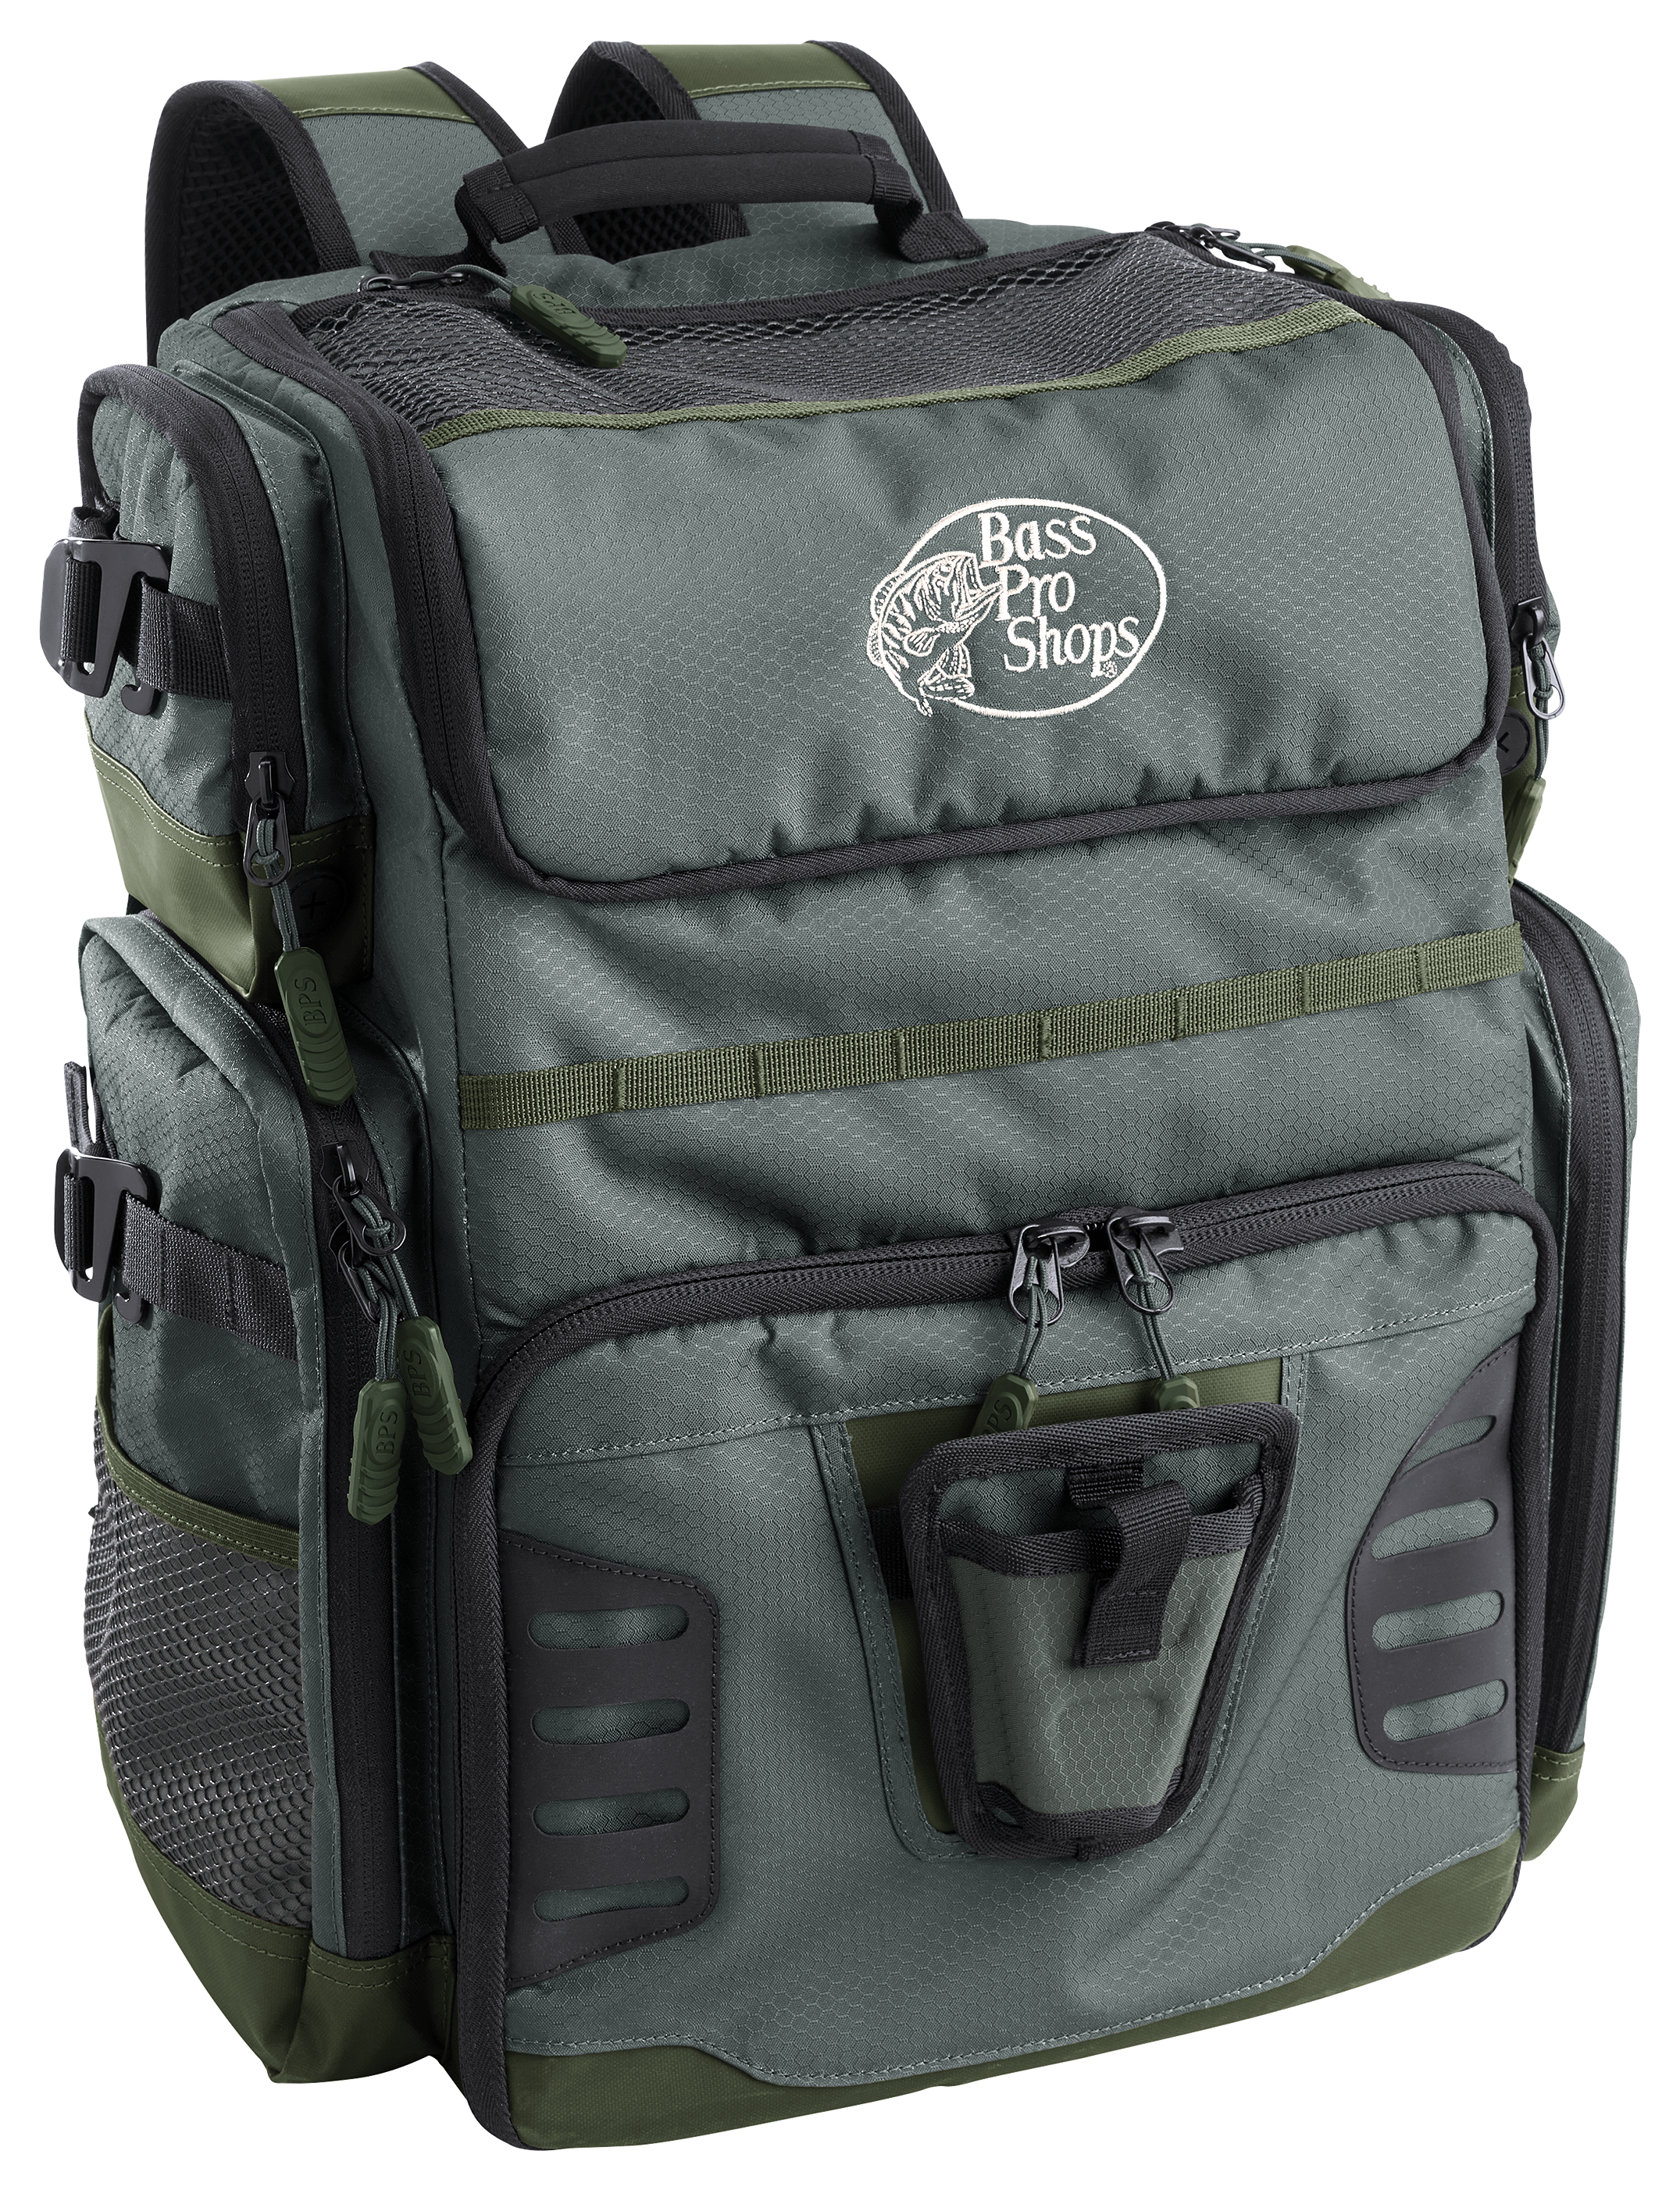 Bass Pro Shops Extreme Series Wide-Top Tackle Bag - Cabelas - BASS